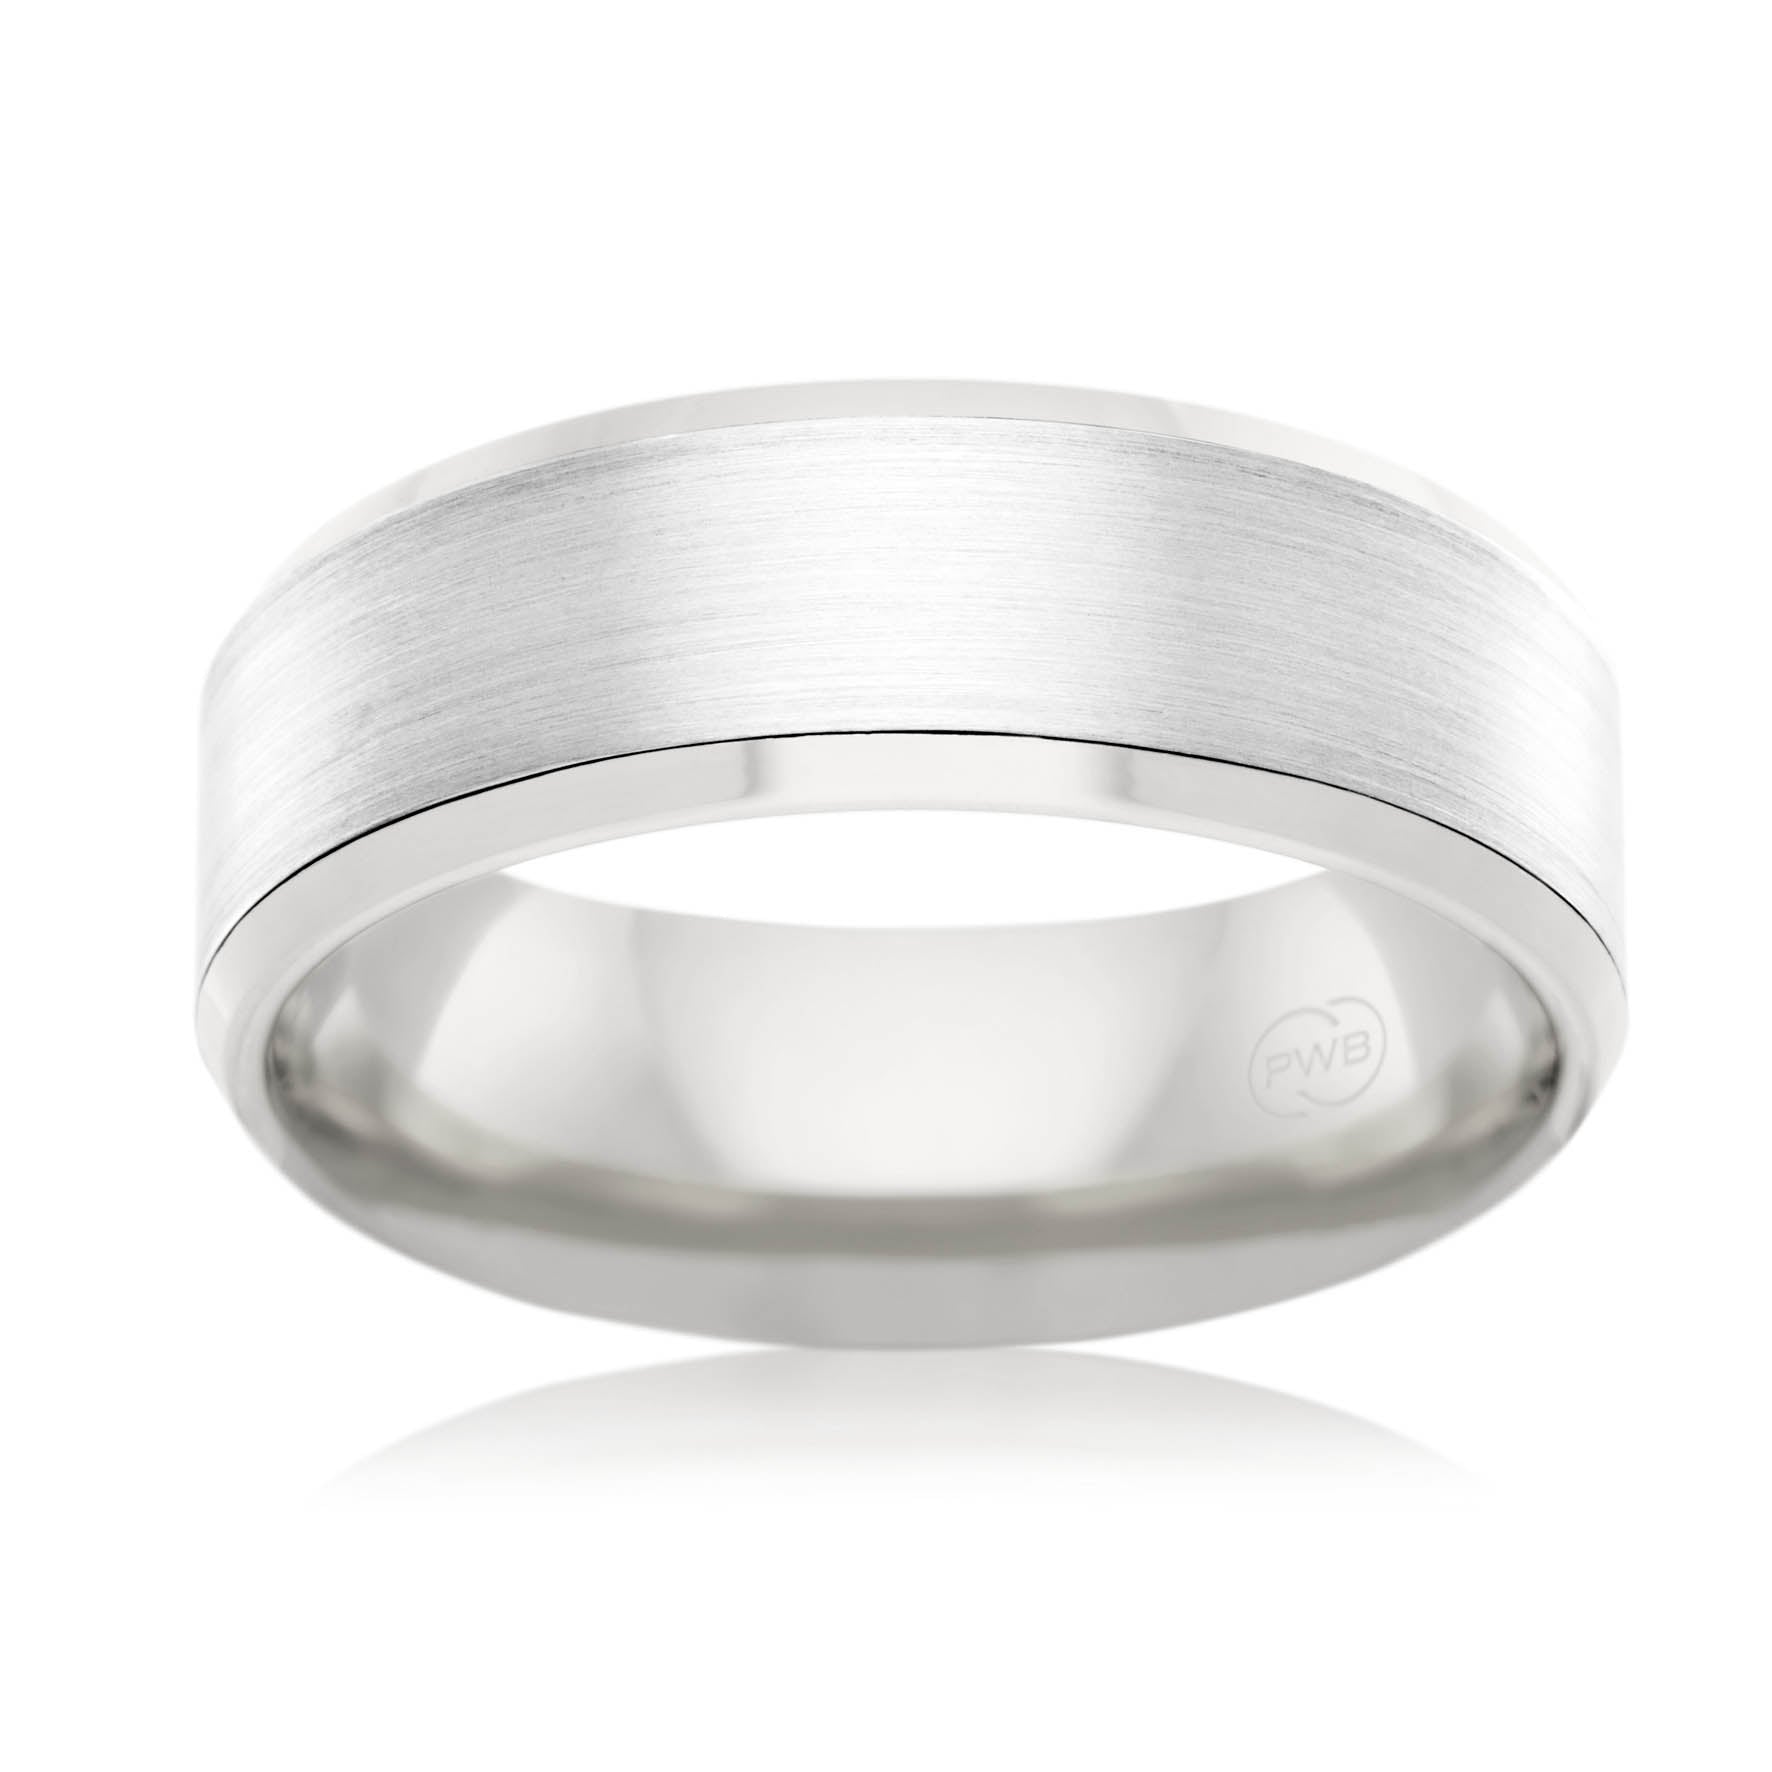 Two-Tone Gents Wedding Ring with Bevelled Edges.